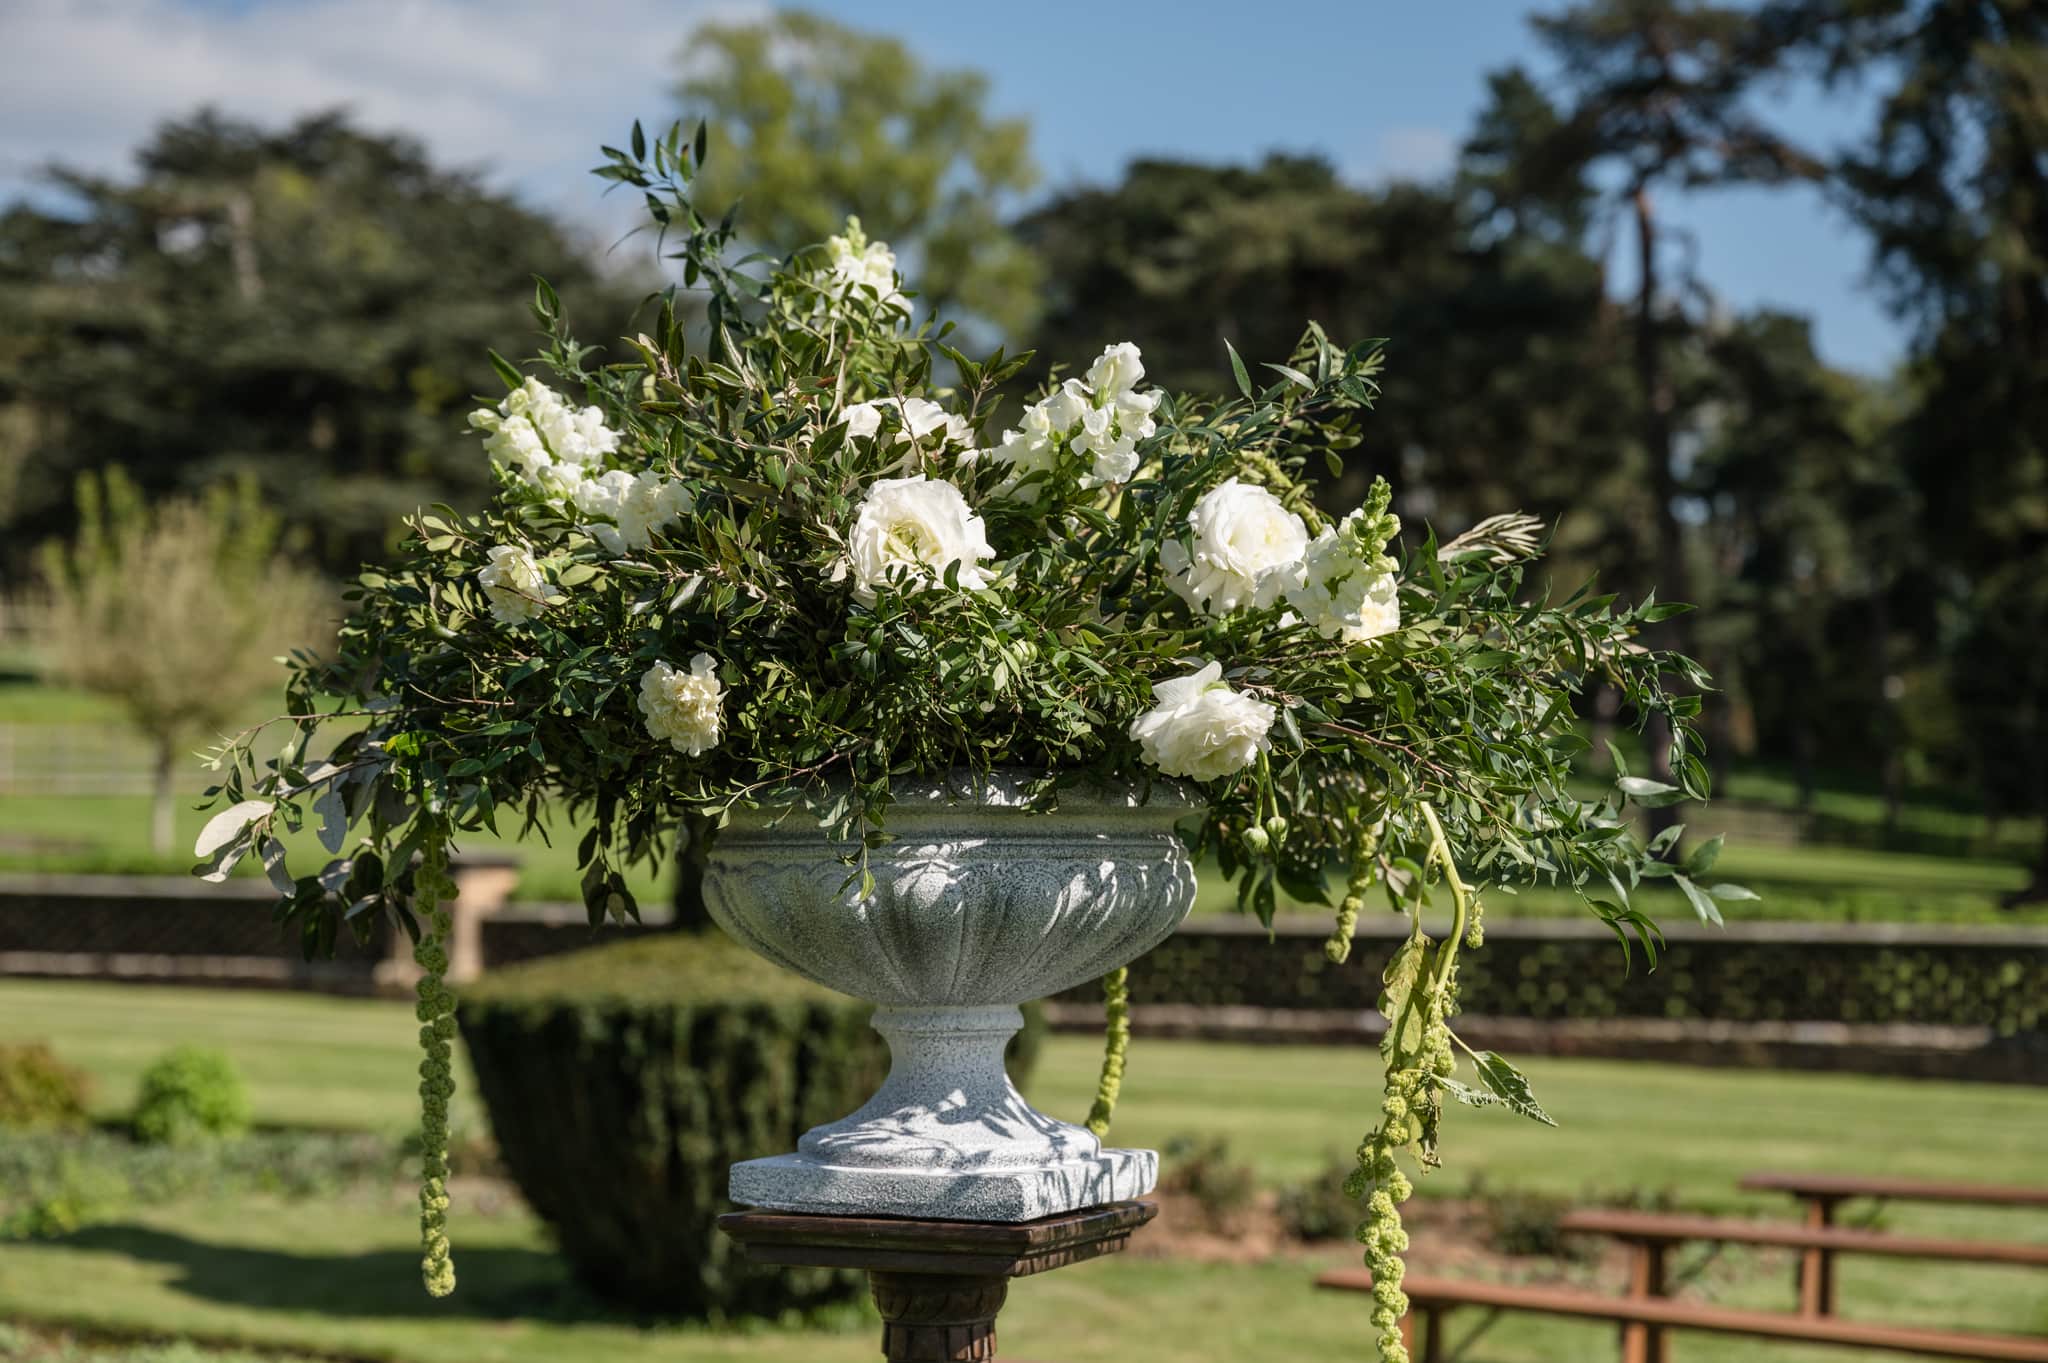 Close up of white flowers and greenery in an urn at the start of the aisle for an outdoor ceremony